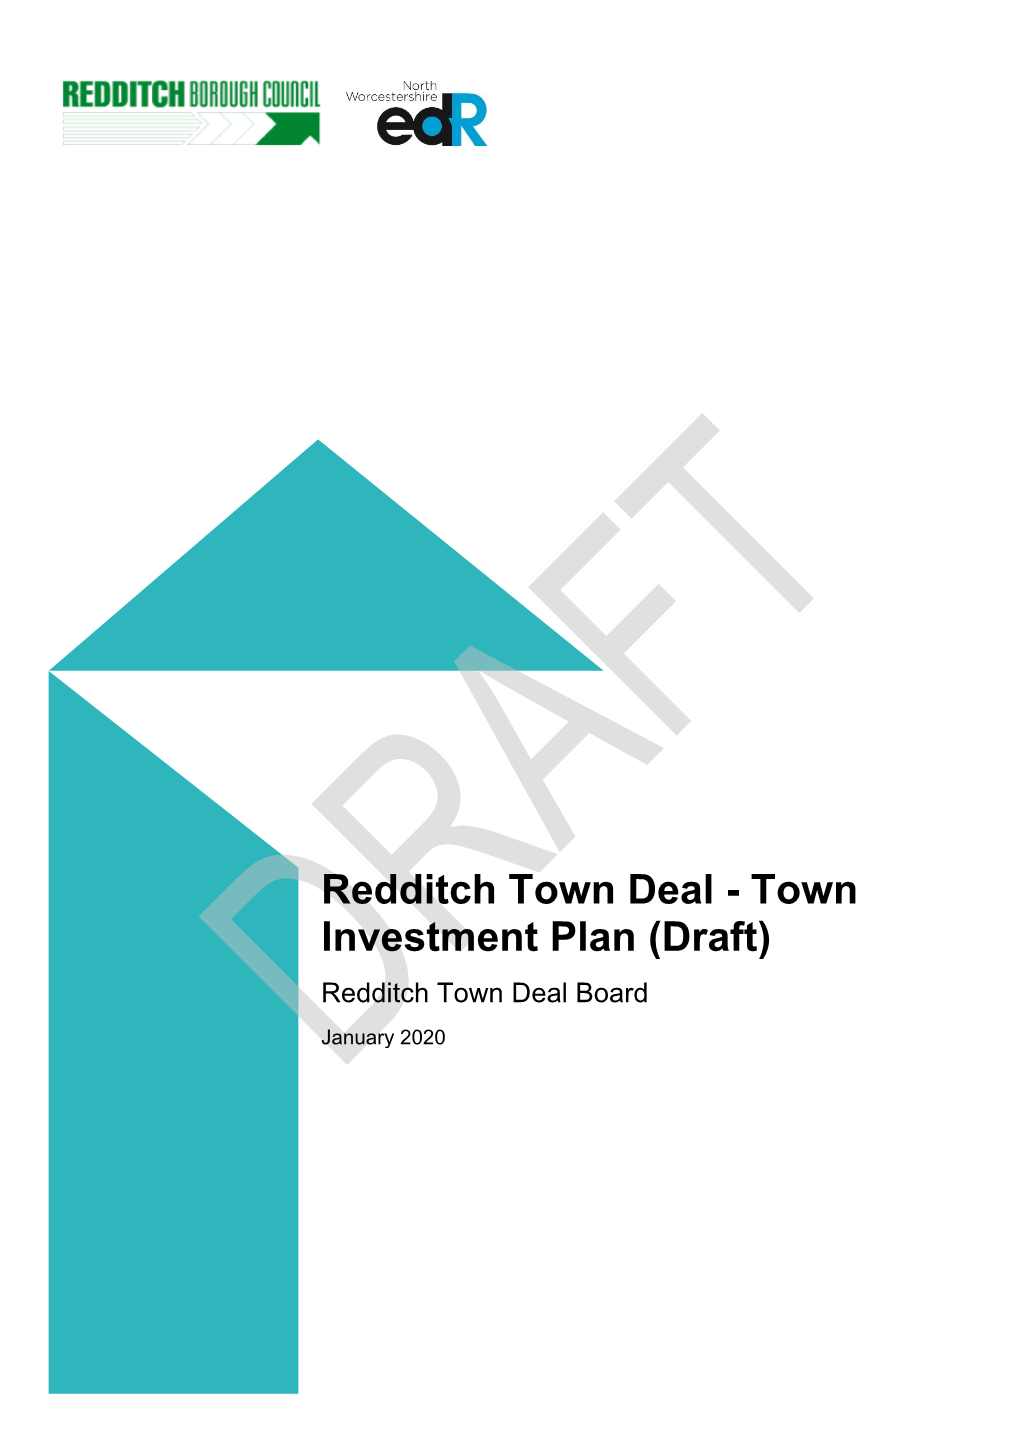 Town Investment Plan (Draft) Redditch Town Deal Board January 2020